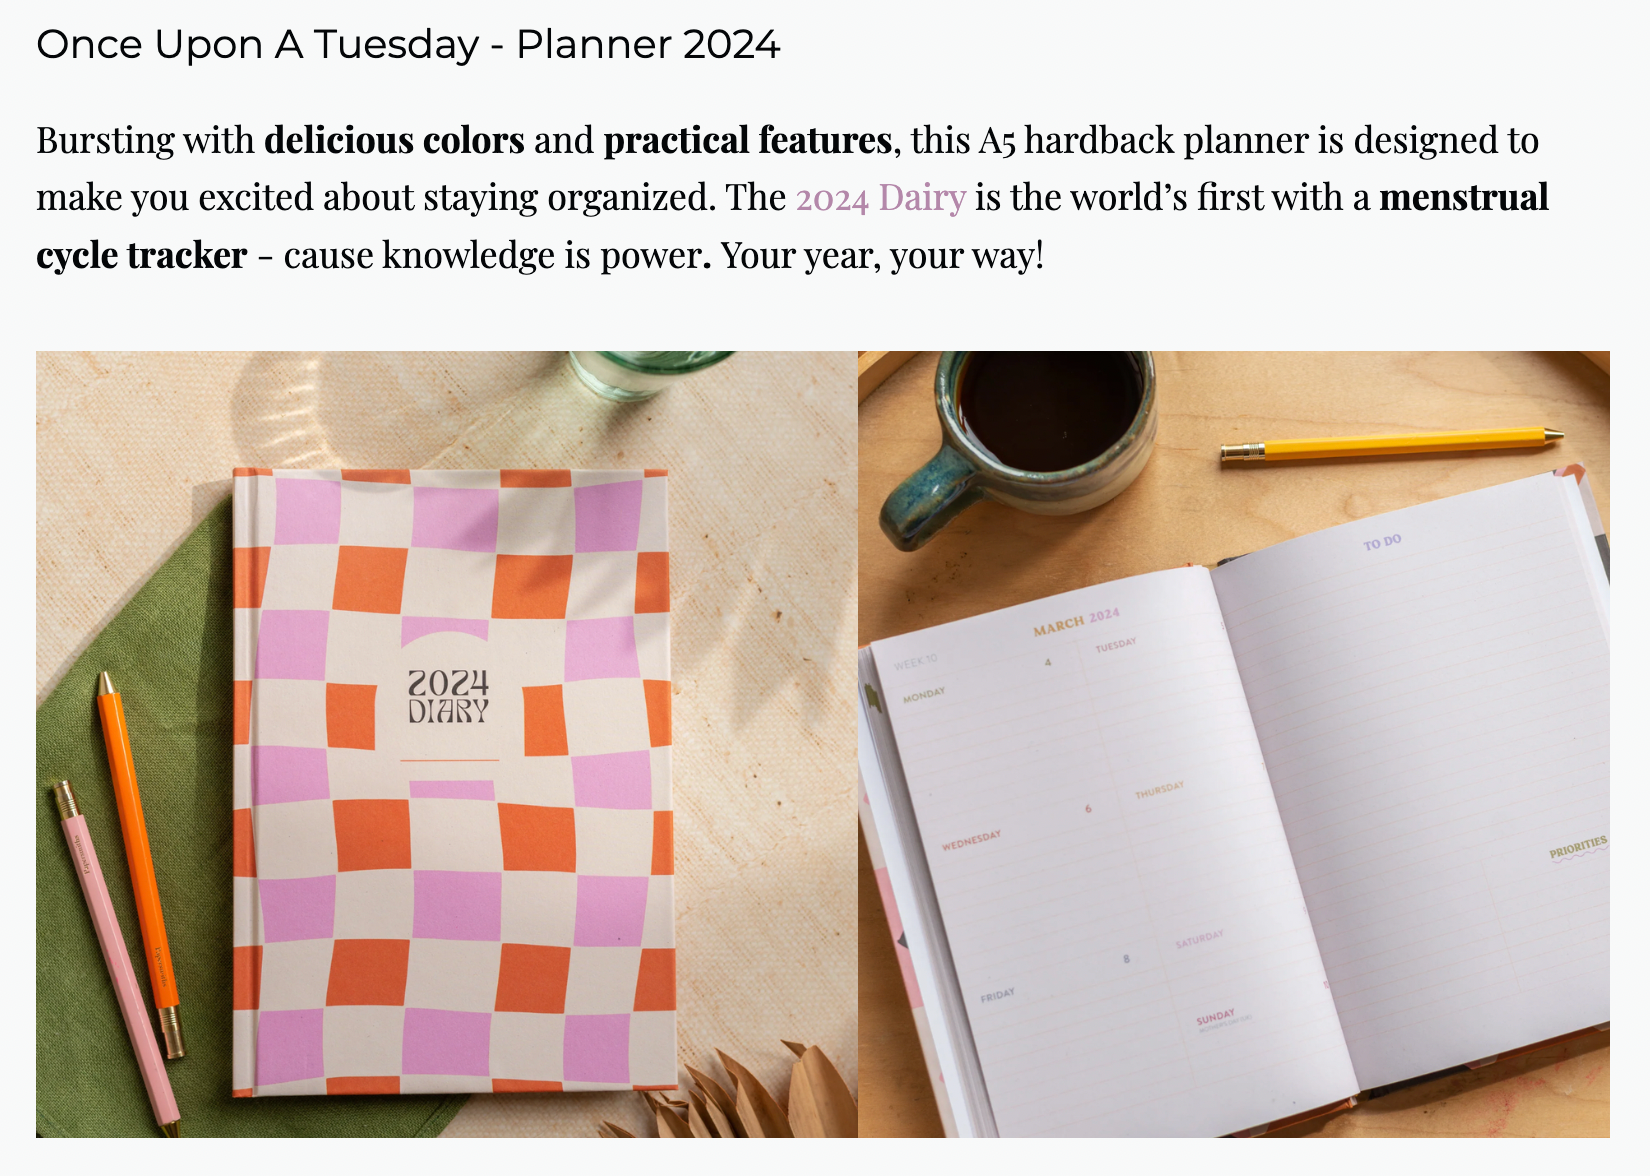 design hunger online PR feature for Once Upon a Tuesday